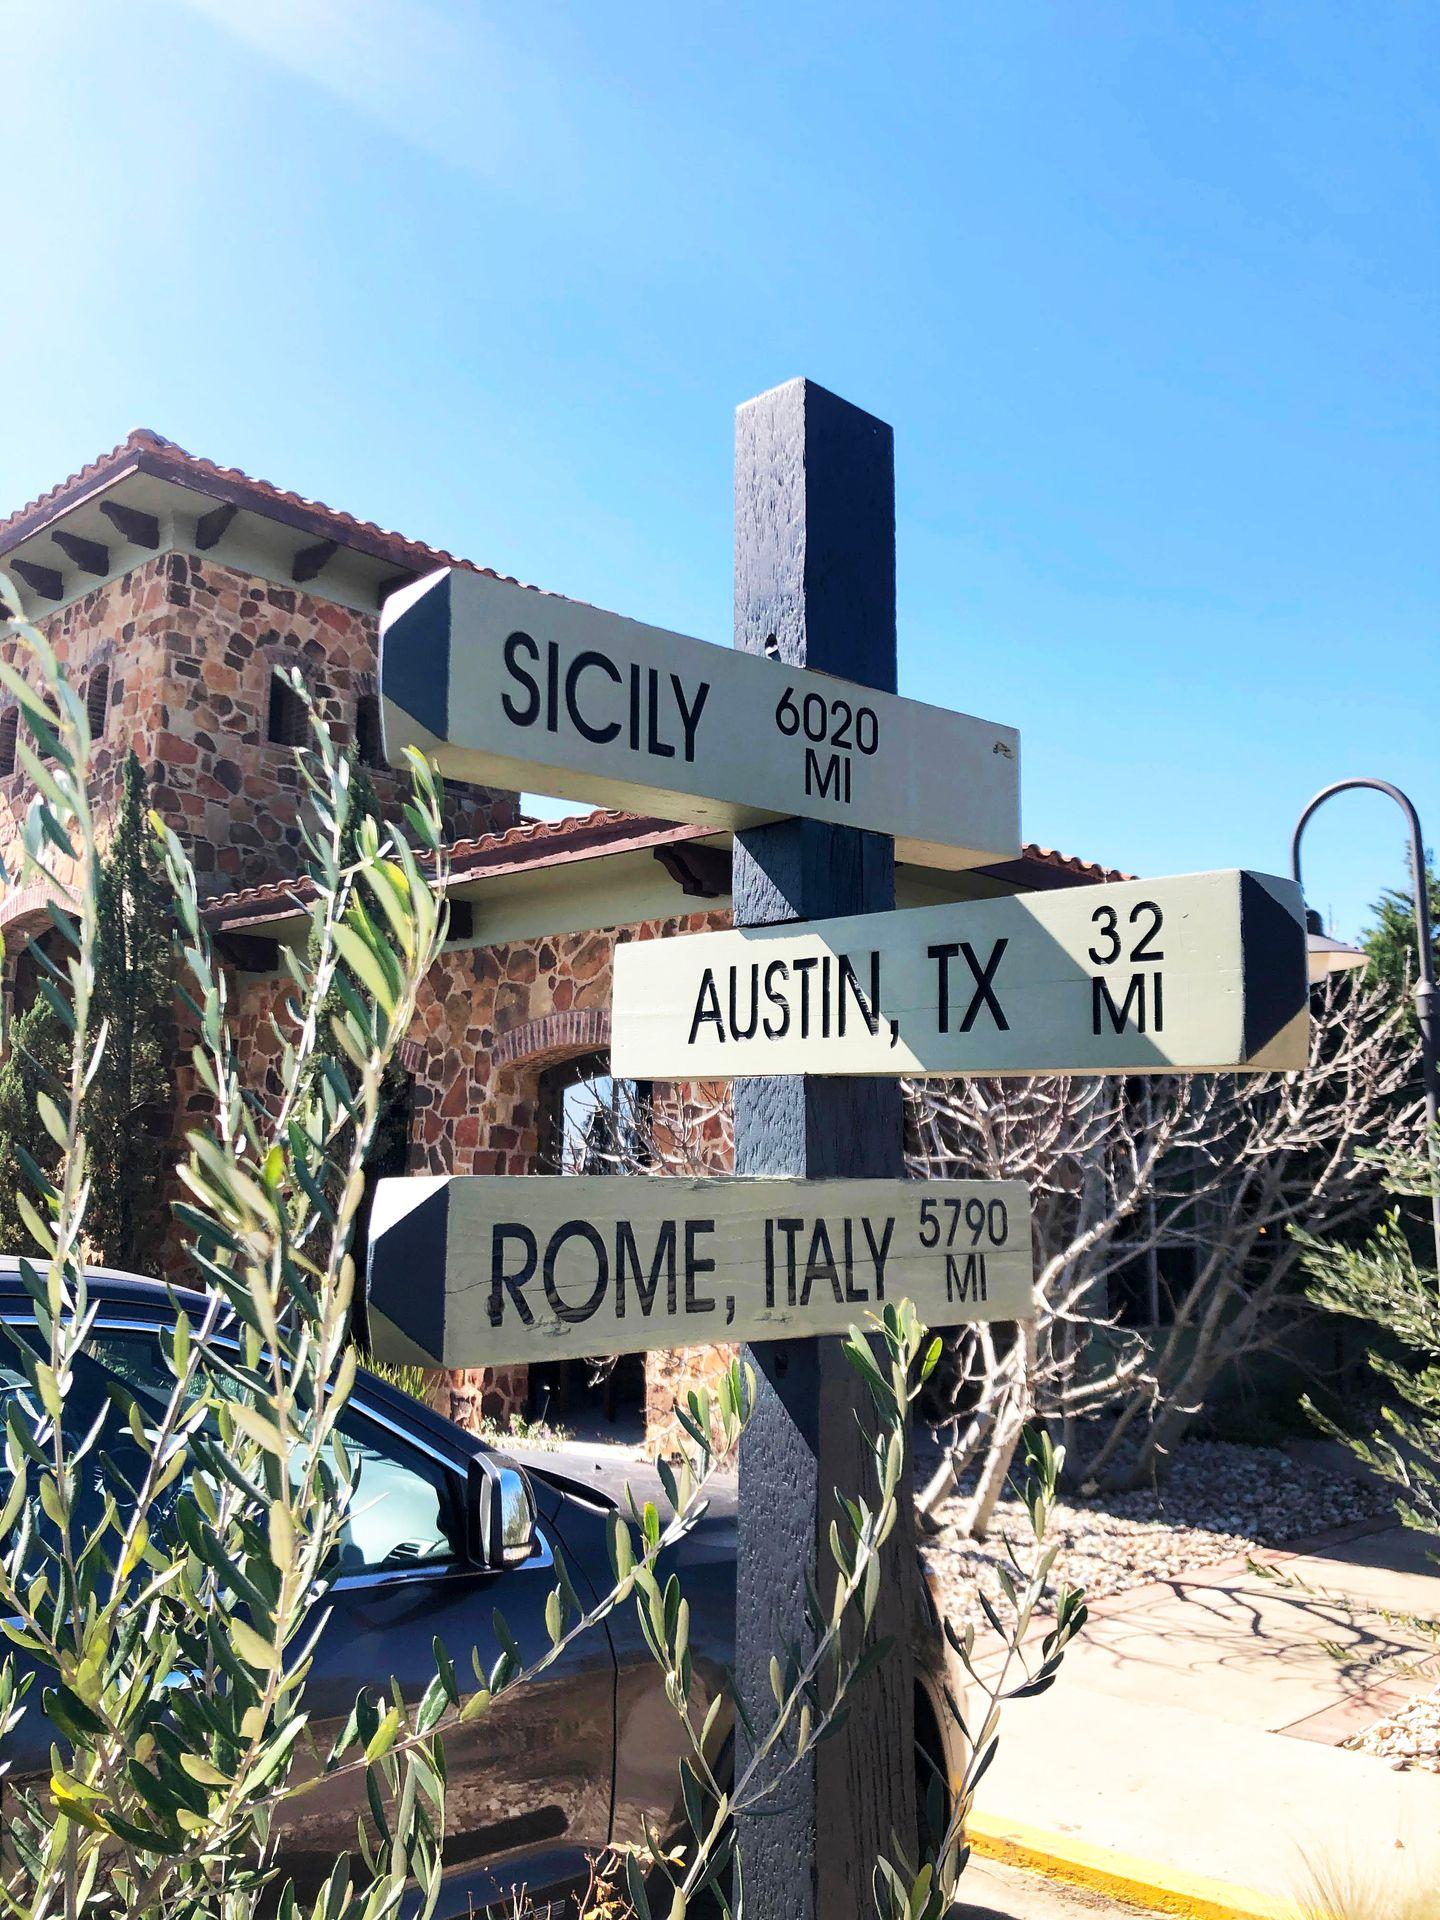 A wooden sign that has the distances from Sicily, Austin and Rome